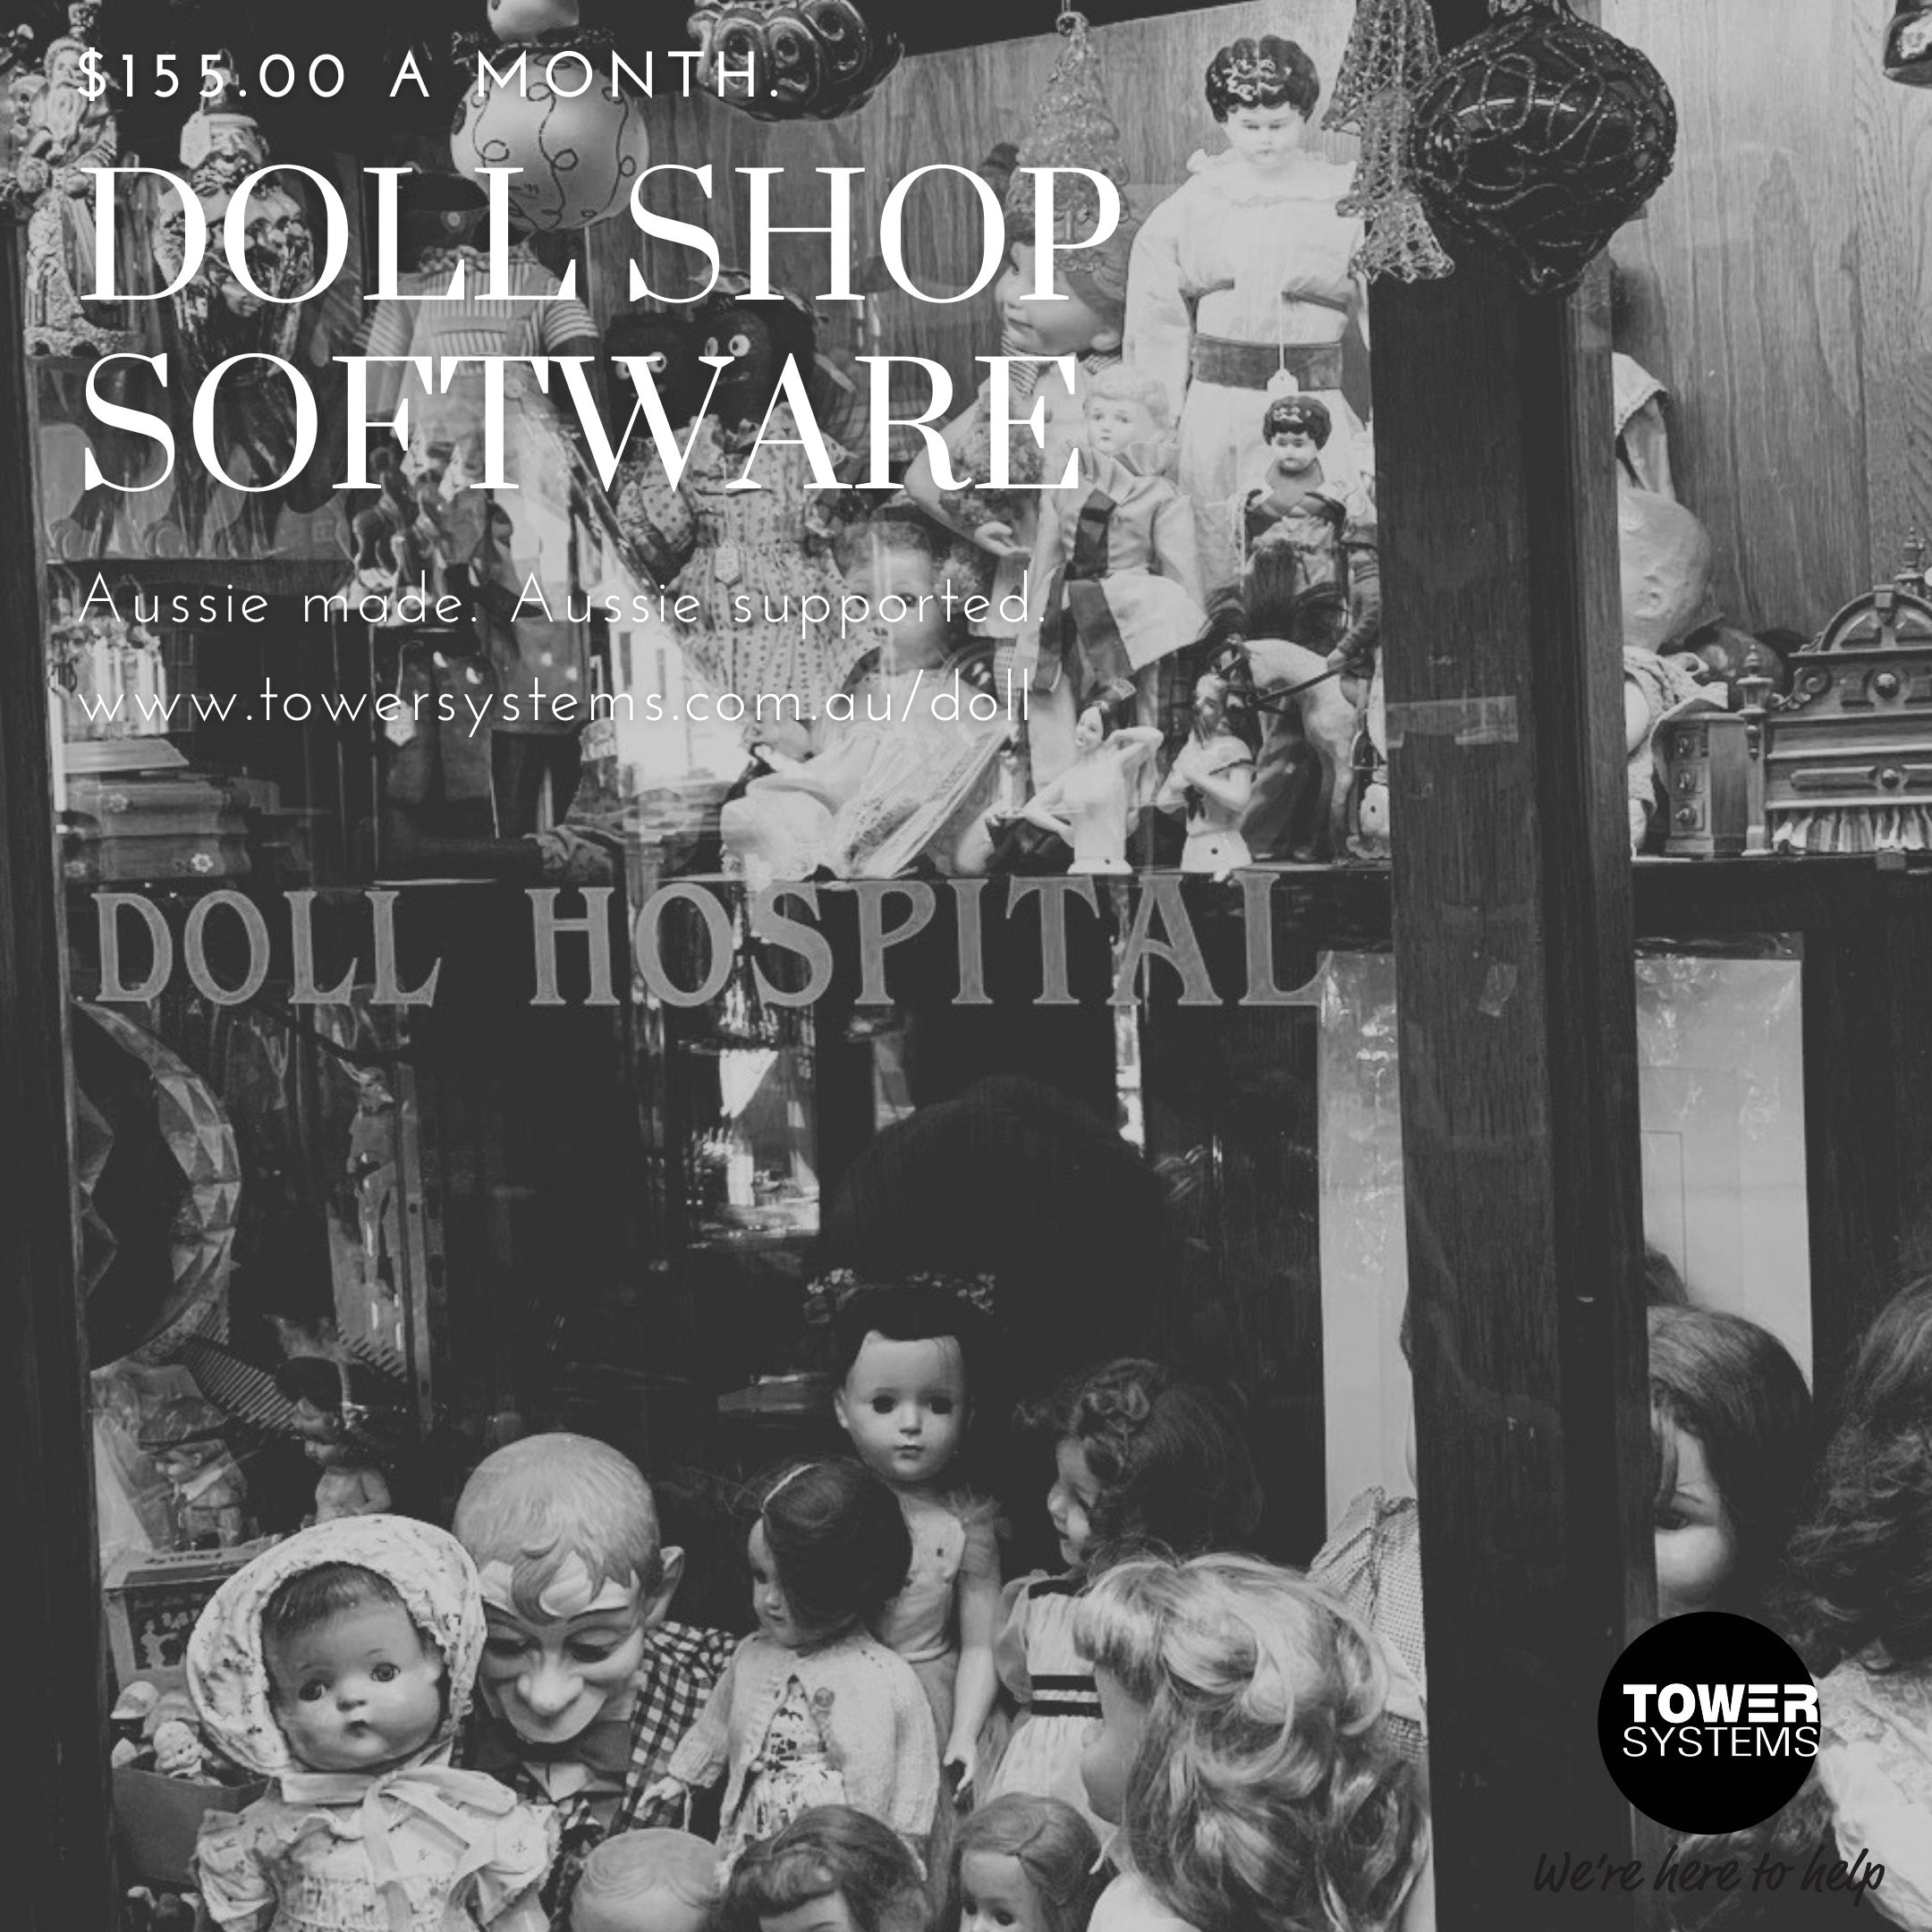 Aussie made POS software for doll shops